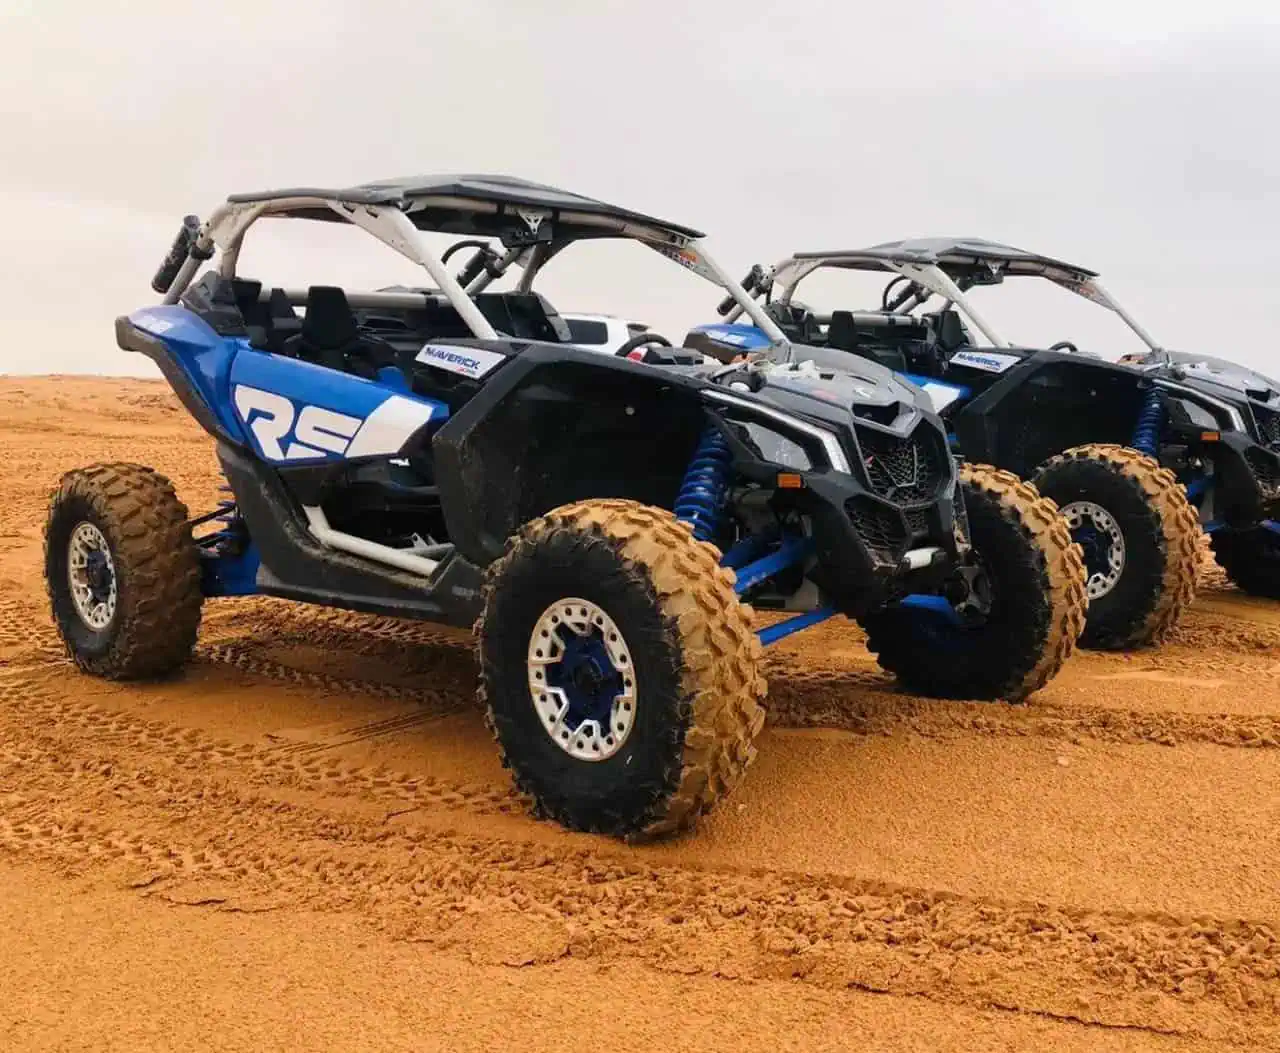 The Thrill of CanAm Buggies in Dubai